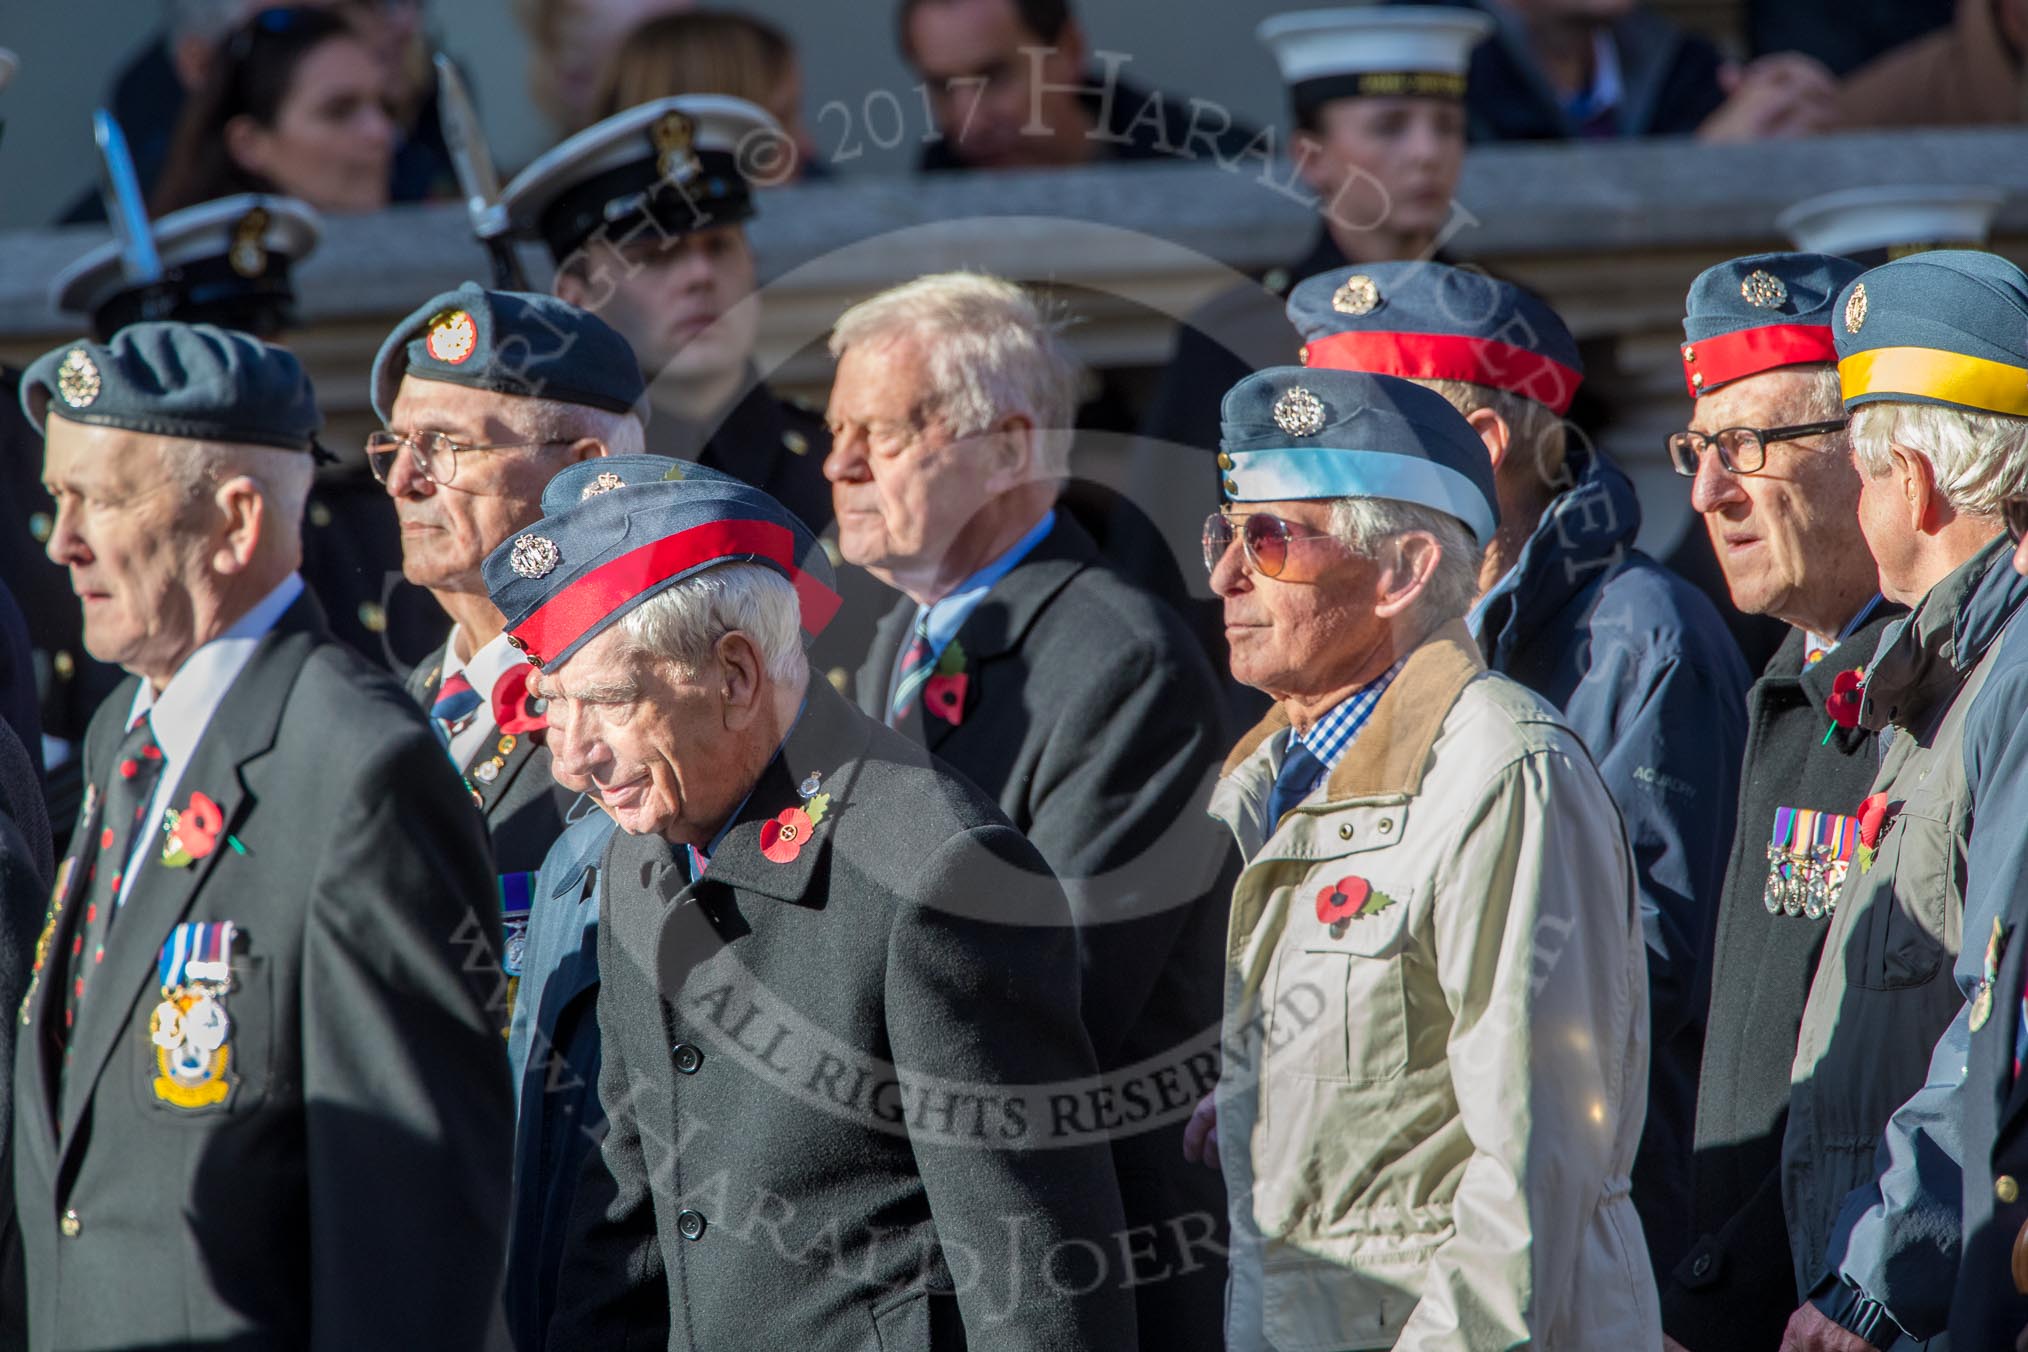 Federation of Royal Air Force Apprentices and Boy Entrants (Group C20, 68 members) during the Royal British Legion March Past on Remembrance Sunday at the Cenotaph, Whitehall, Westminster, London, 11 November 2018, 12:17.